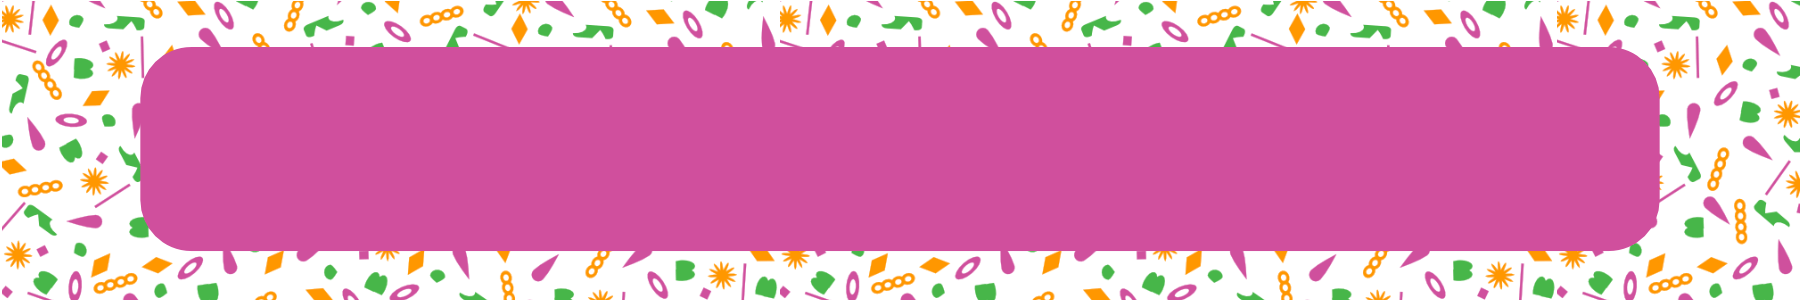 Random shapes in Haluna Happy Names shades of pink, orange and green create a busy background for a solid pink text box carrying the name of the exclusive Haluna Happy Names design showcased on this page.